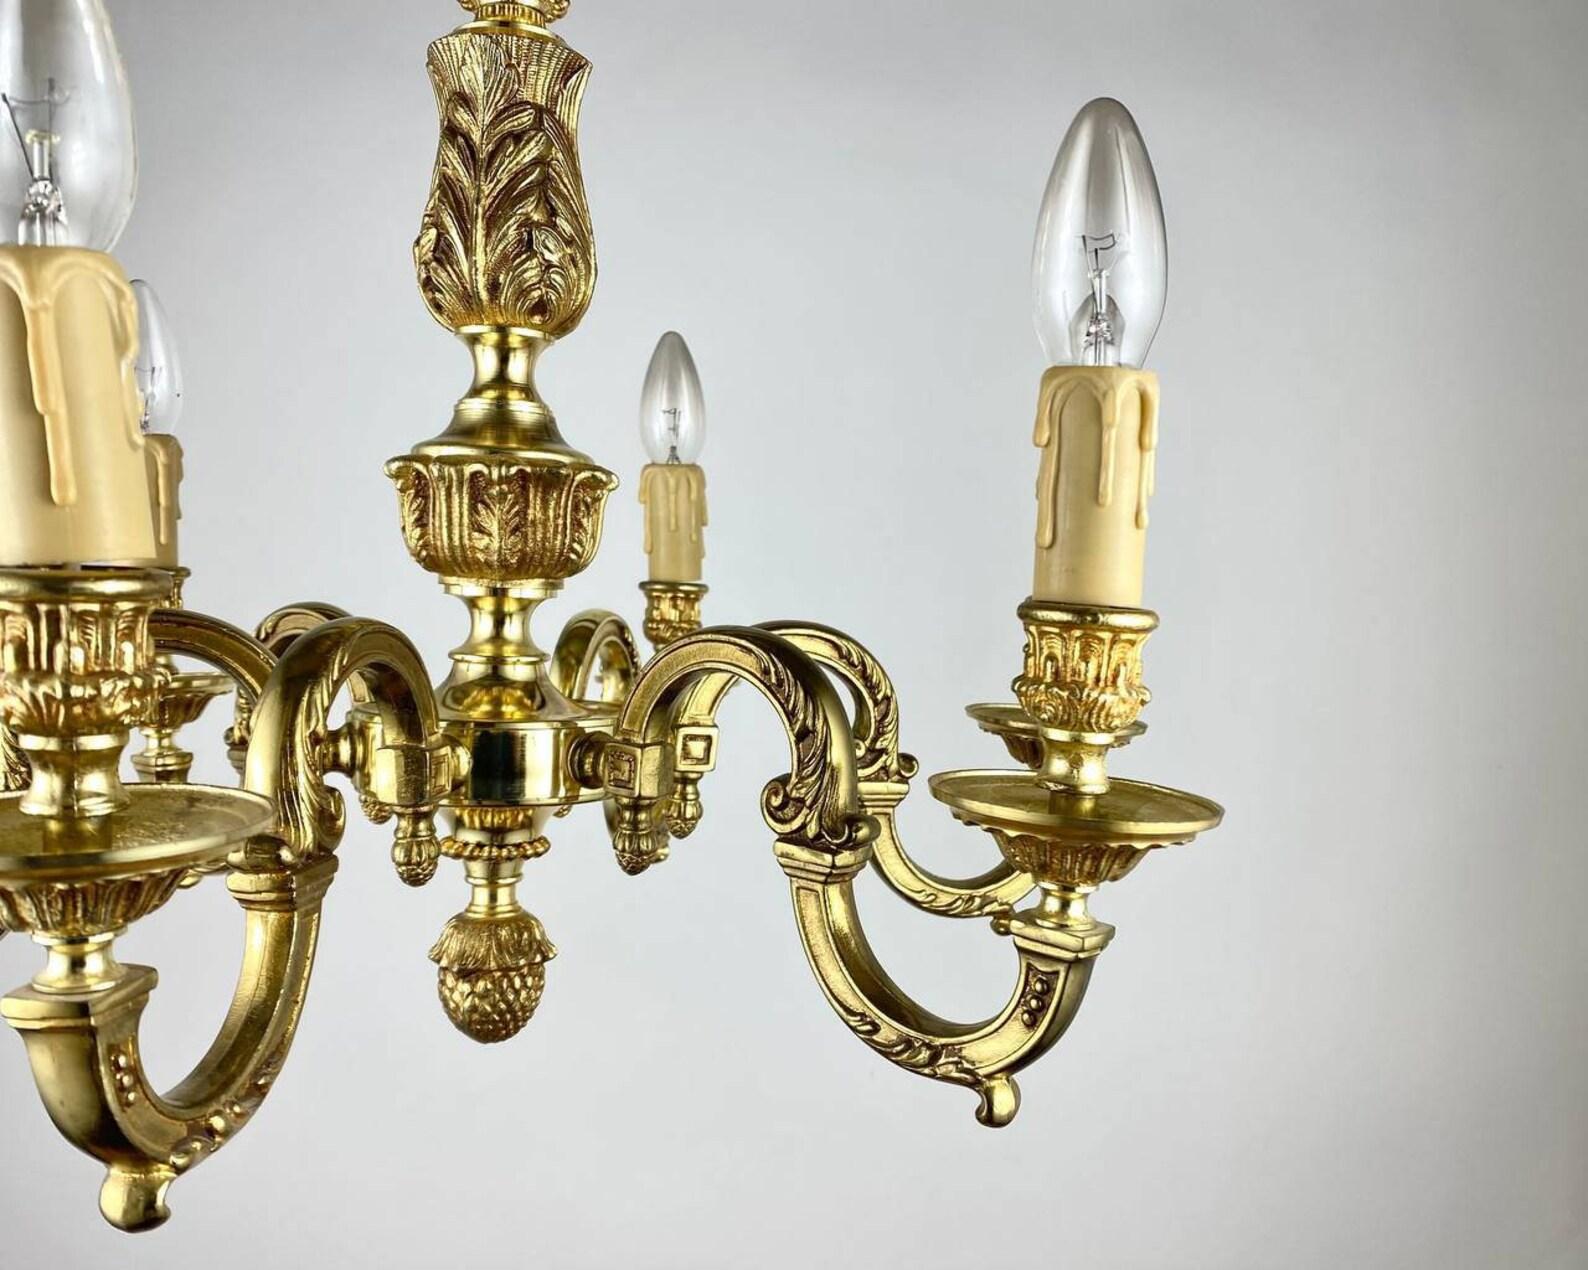 Magnificent Bronze Chandelier In Empire Style  Six Light Pendant Lighting In Good Condition For Sale In Bastogne, BE